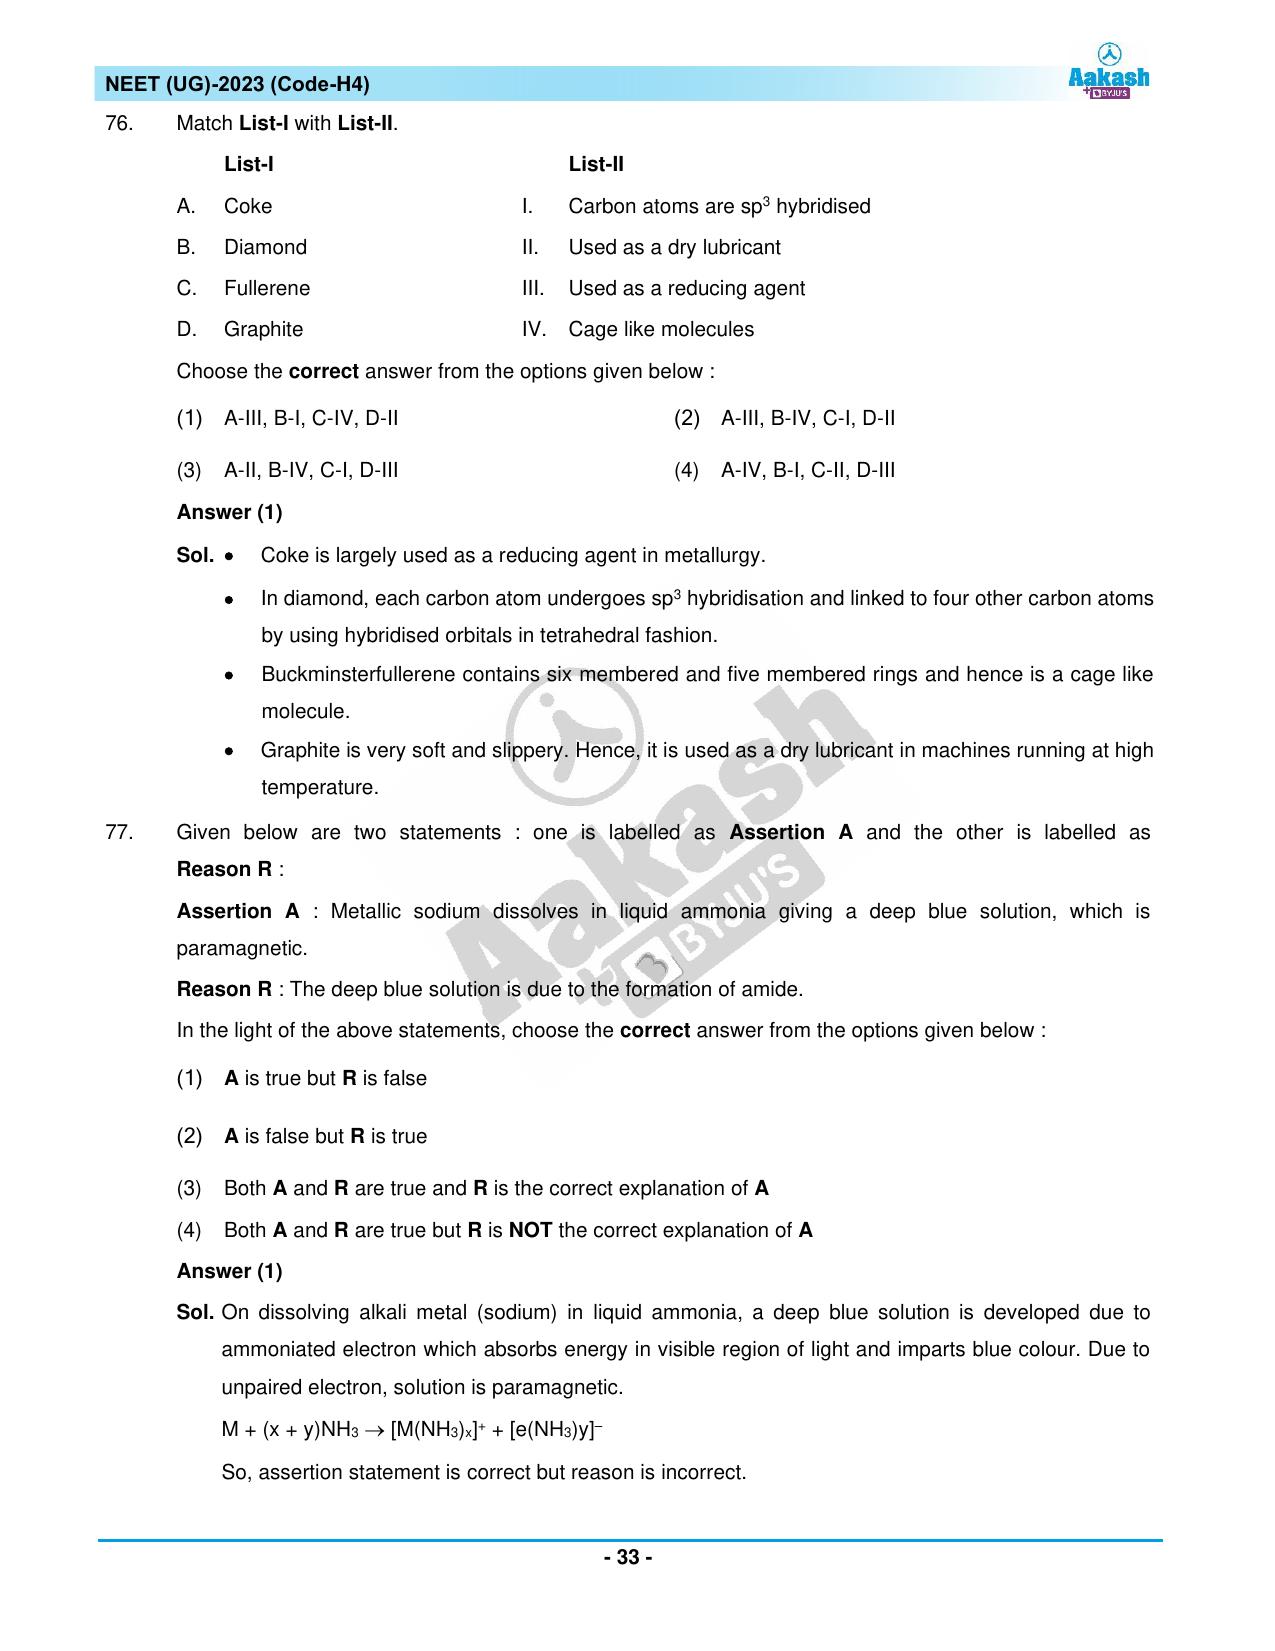 NEET 2023 Question Paper H4 - Page 33